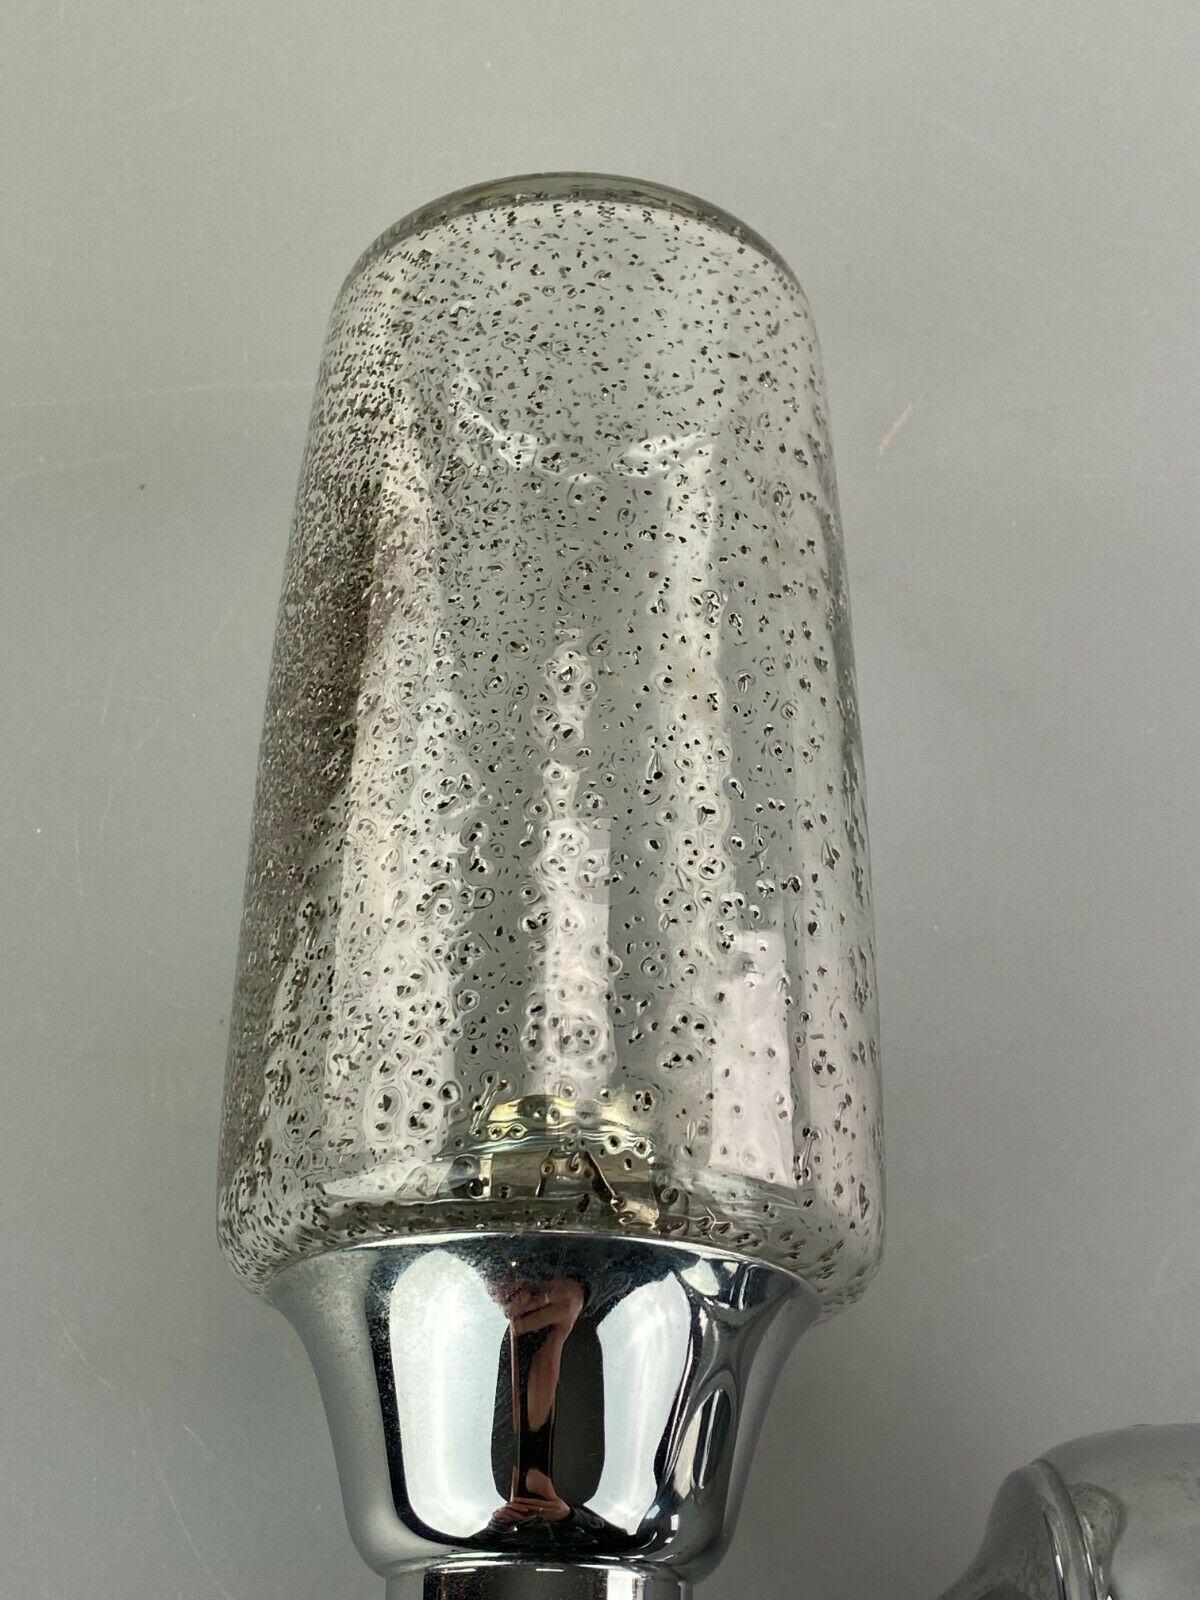 60s 70s Lamp Light Wall Lamp Wall Sconce Hillebrand Space Age Design In Good Condition For Sale In Neuenkirchen, NI